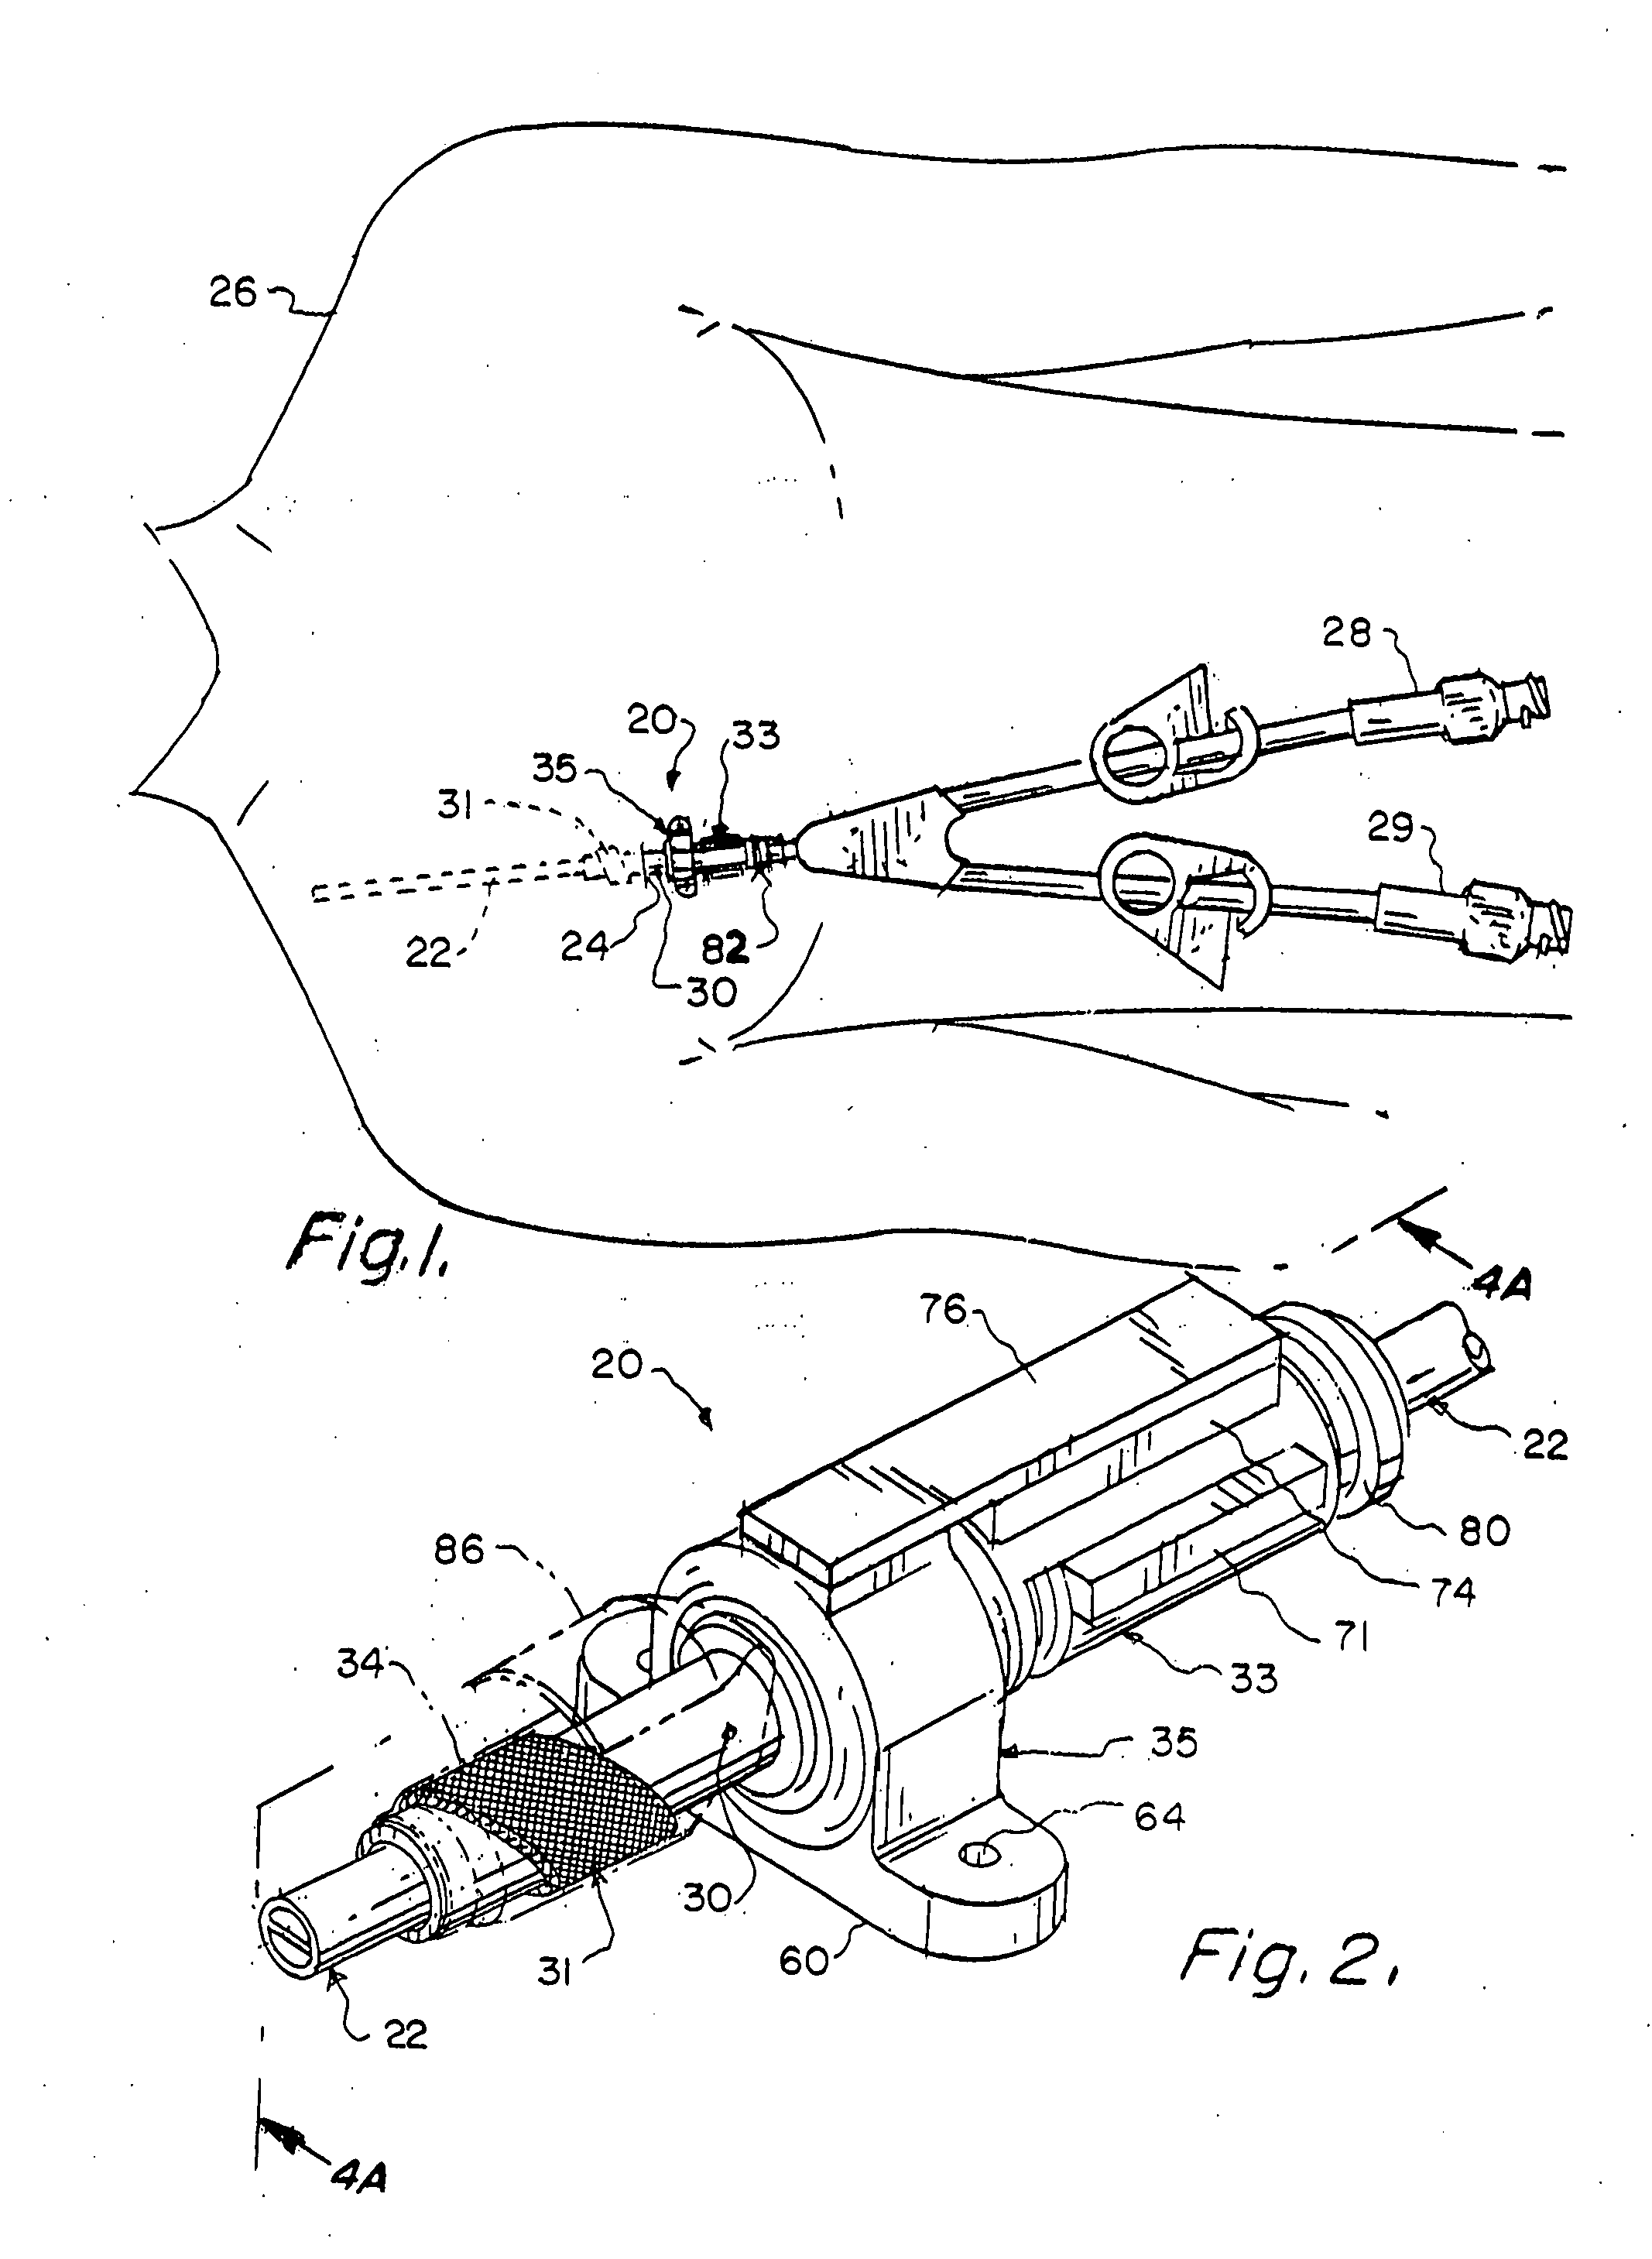 Apparatus and method for percutaneous catheter implantation and replacement